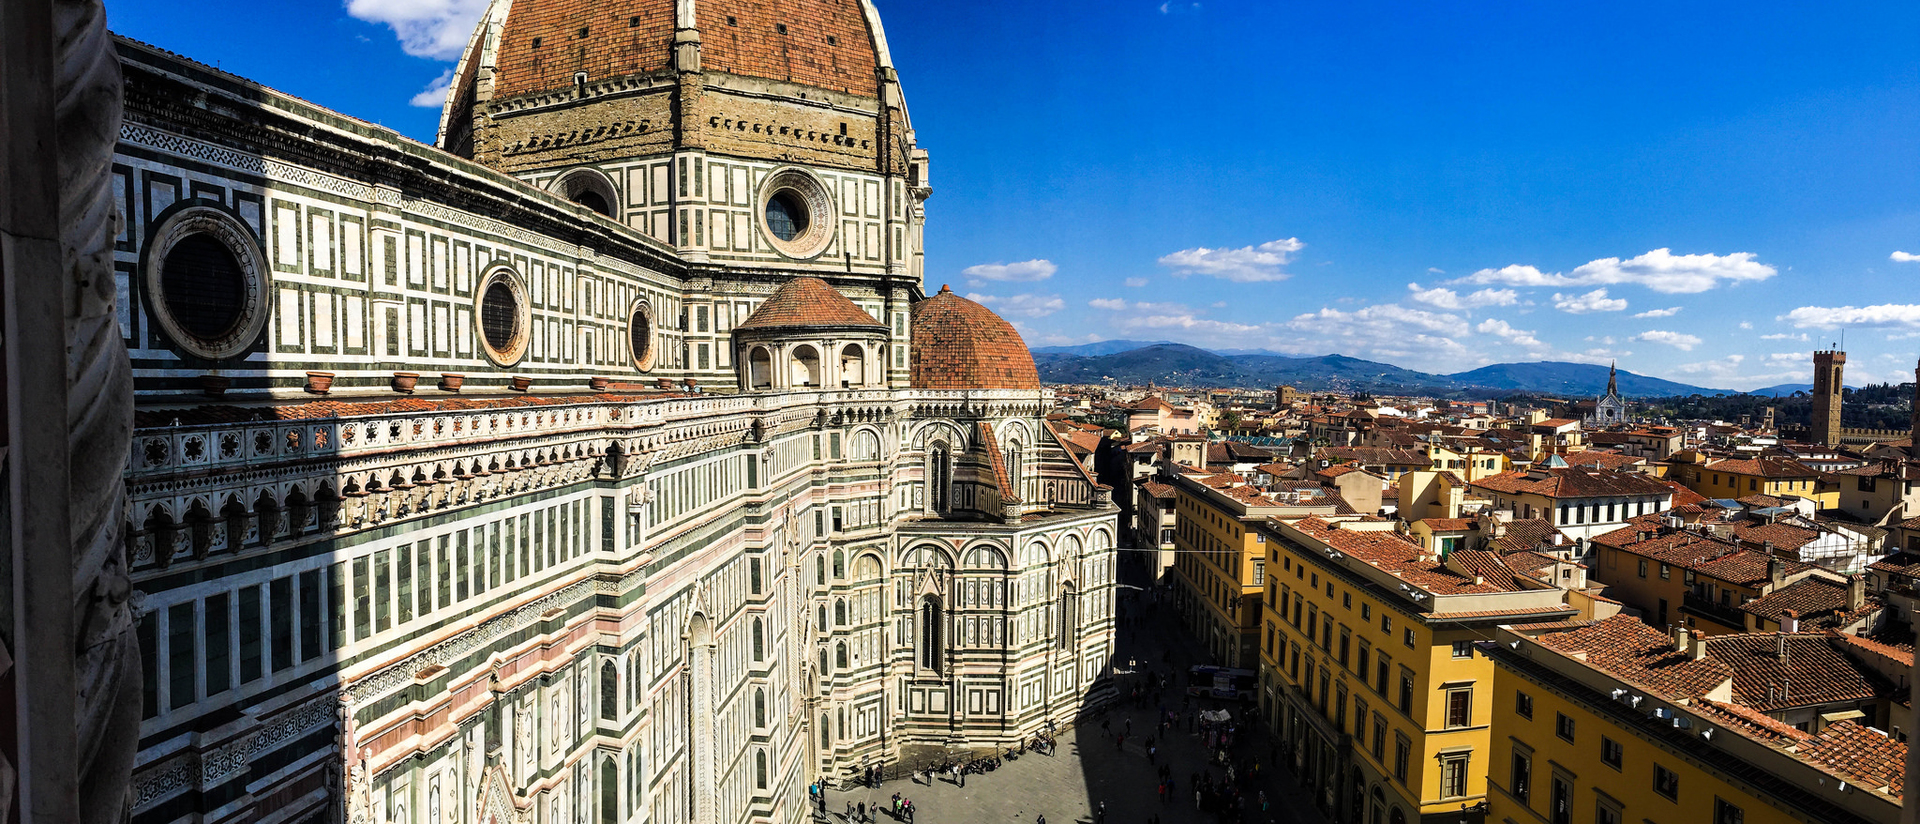 The Duomo in Florence, Italy. 